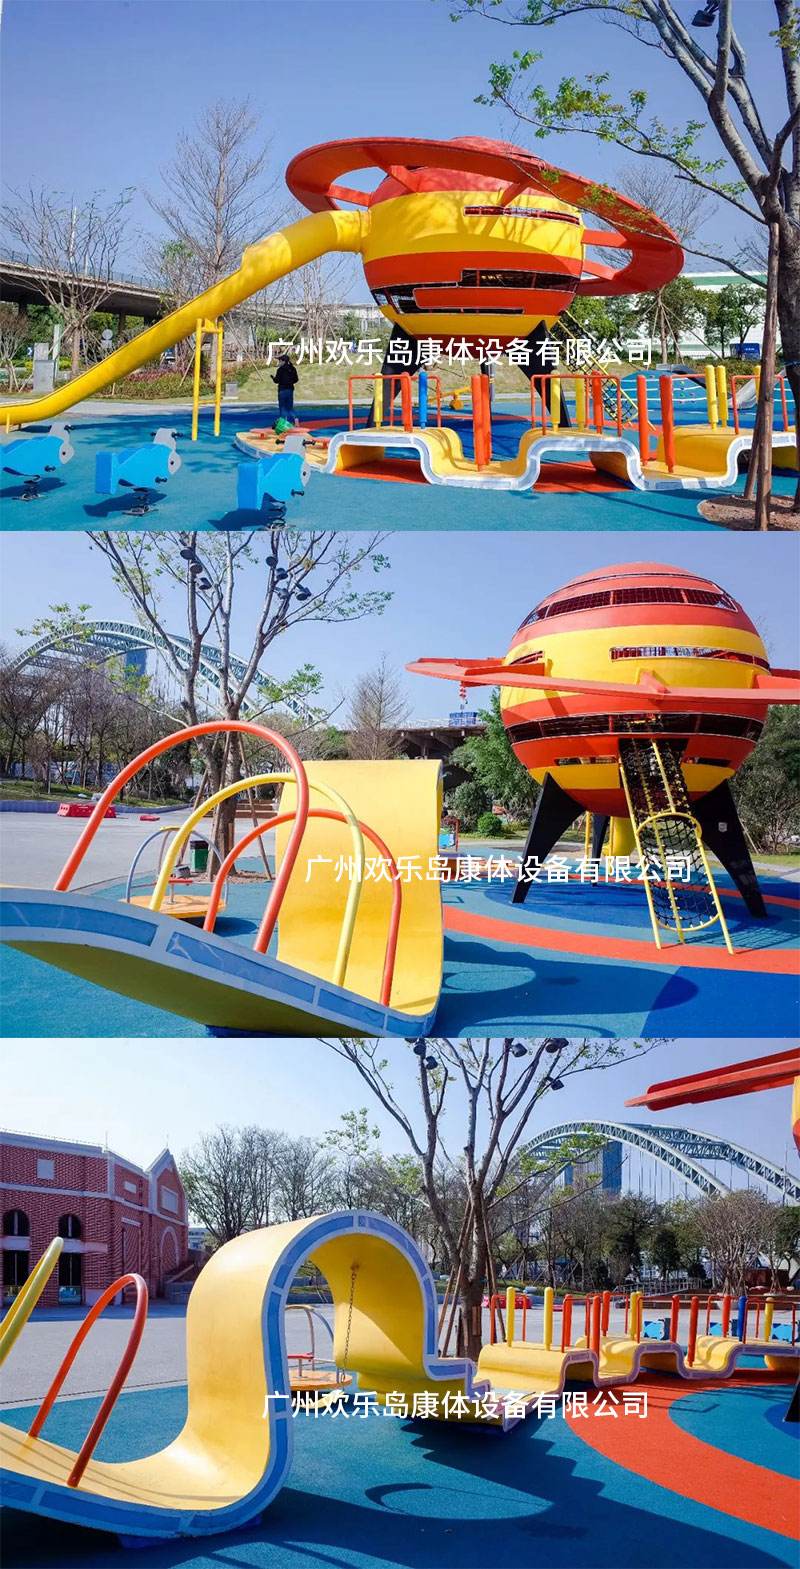 Kids' Outside Slides For Sale Playground Playsets Park Amusement Equipment Factory